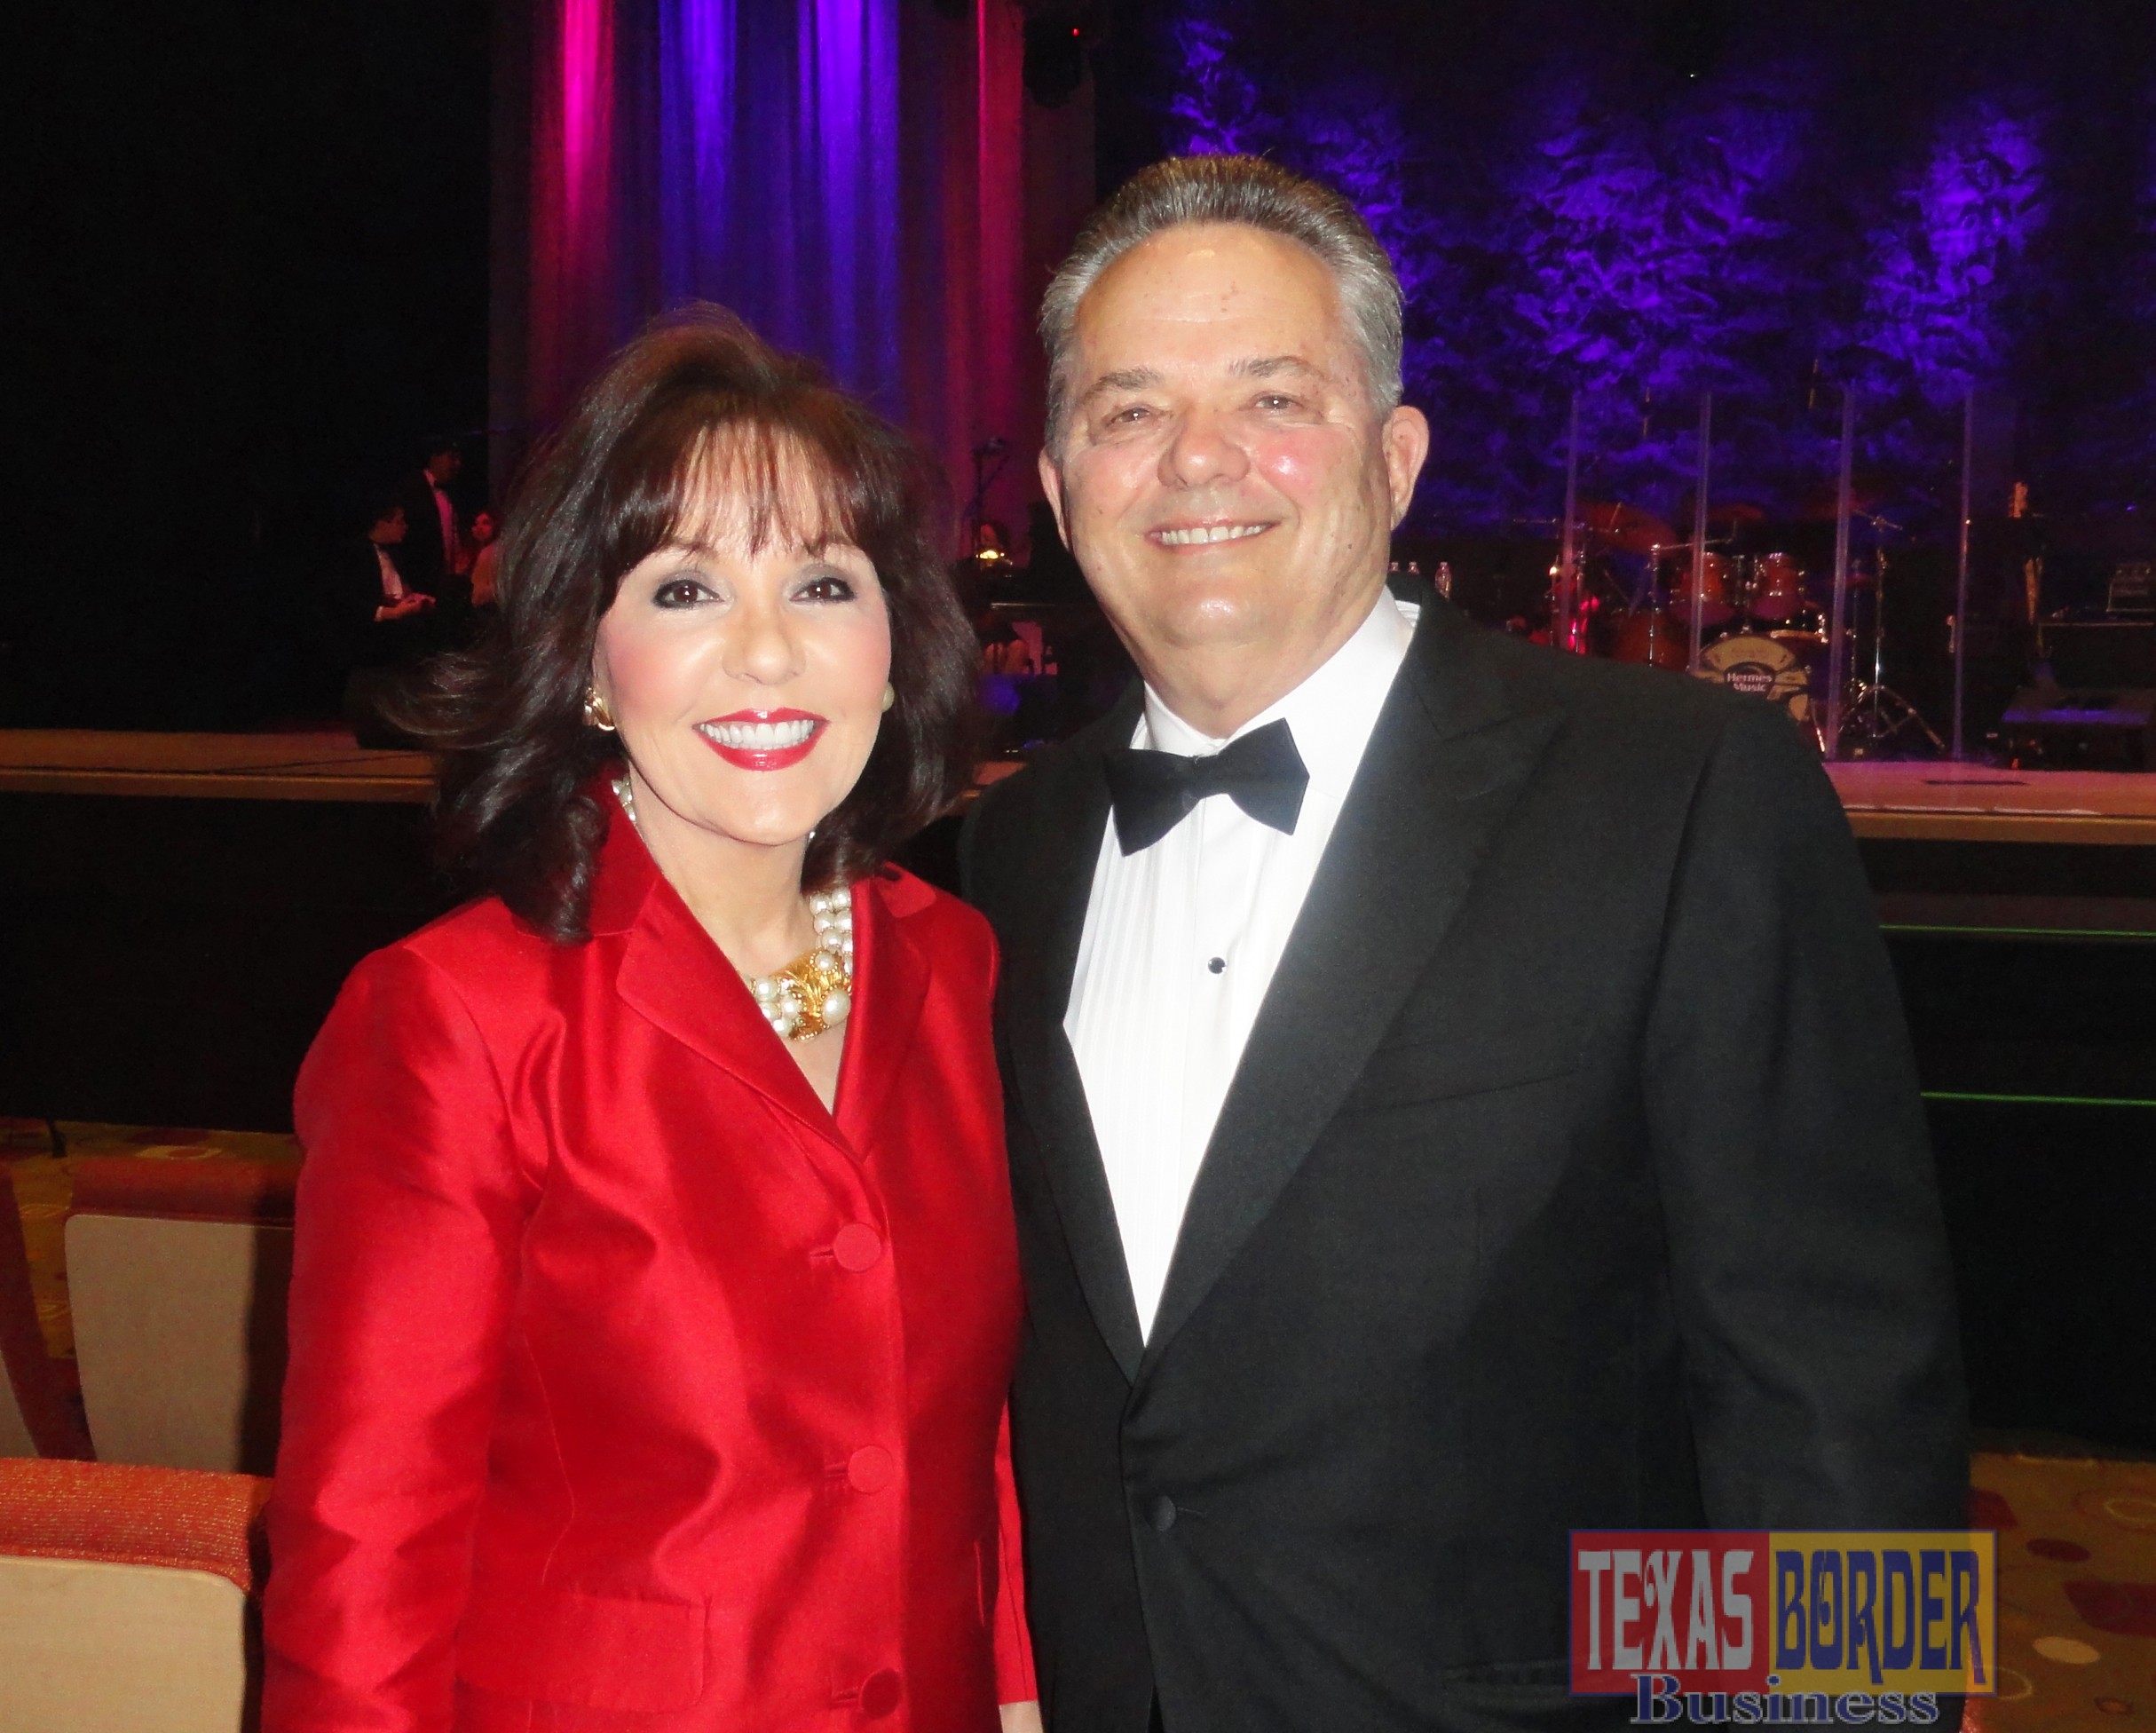 L-R: Janet and Bob Vackar, owners of Bert Ogden Auto Group one of three Platinum Sponsors for 2015 Renaissance Cancer Foundation Valentine’s Gala Music & Romance “The Sinatra Years”.